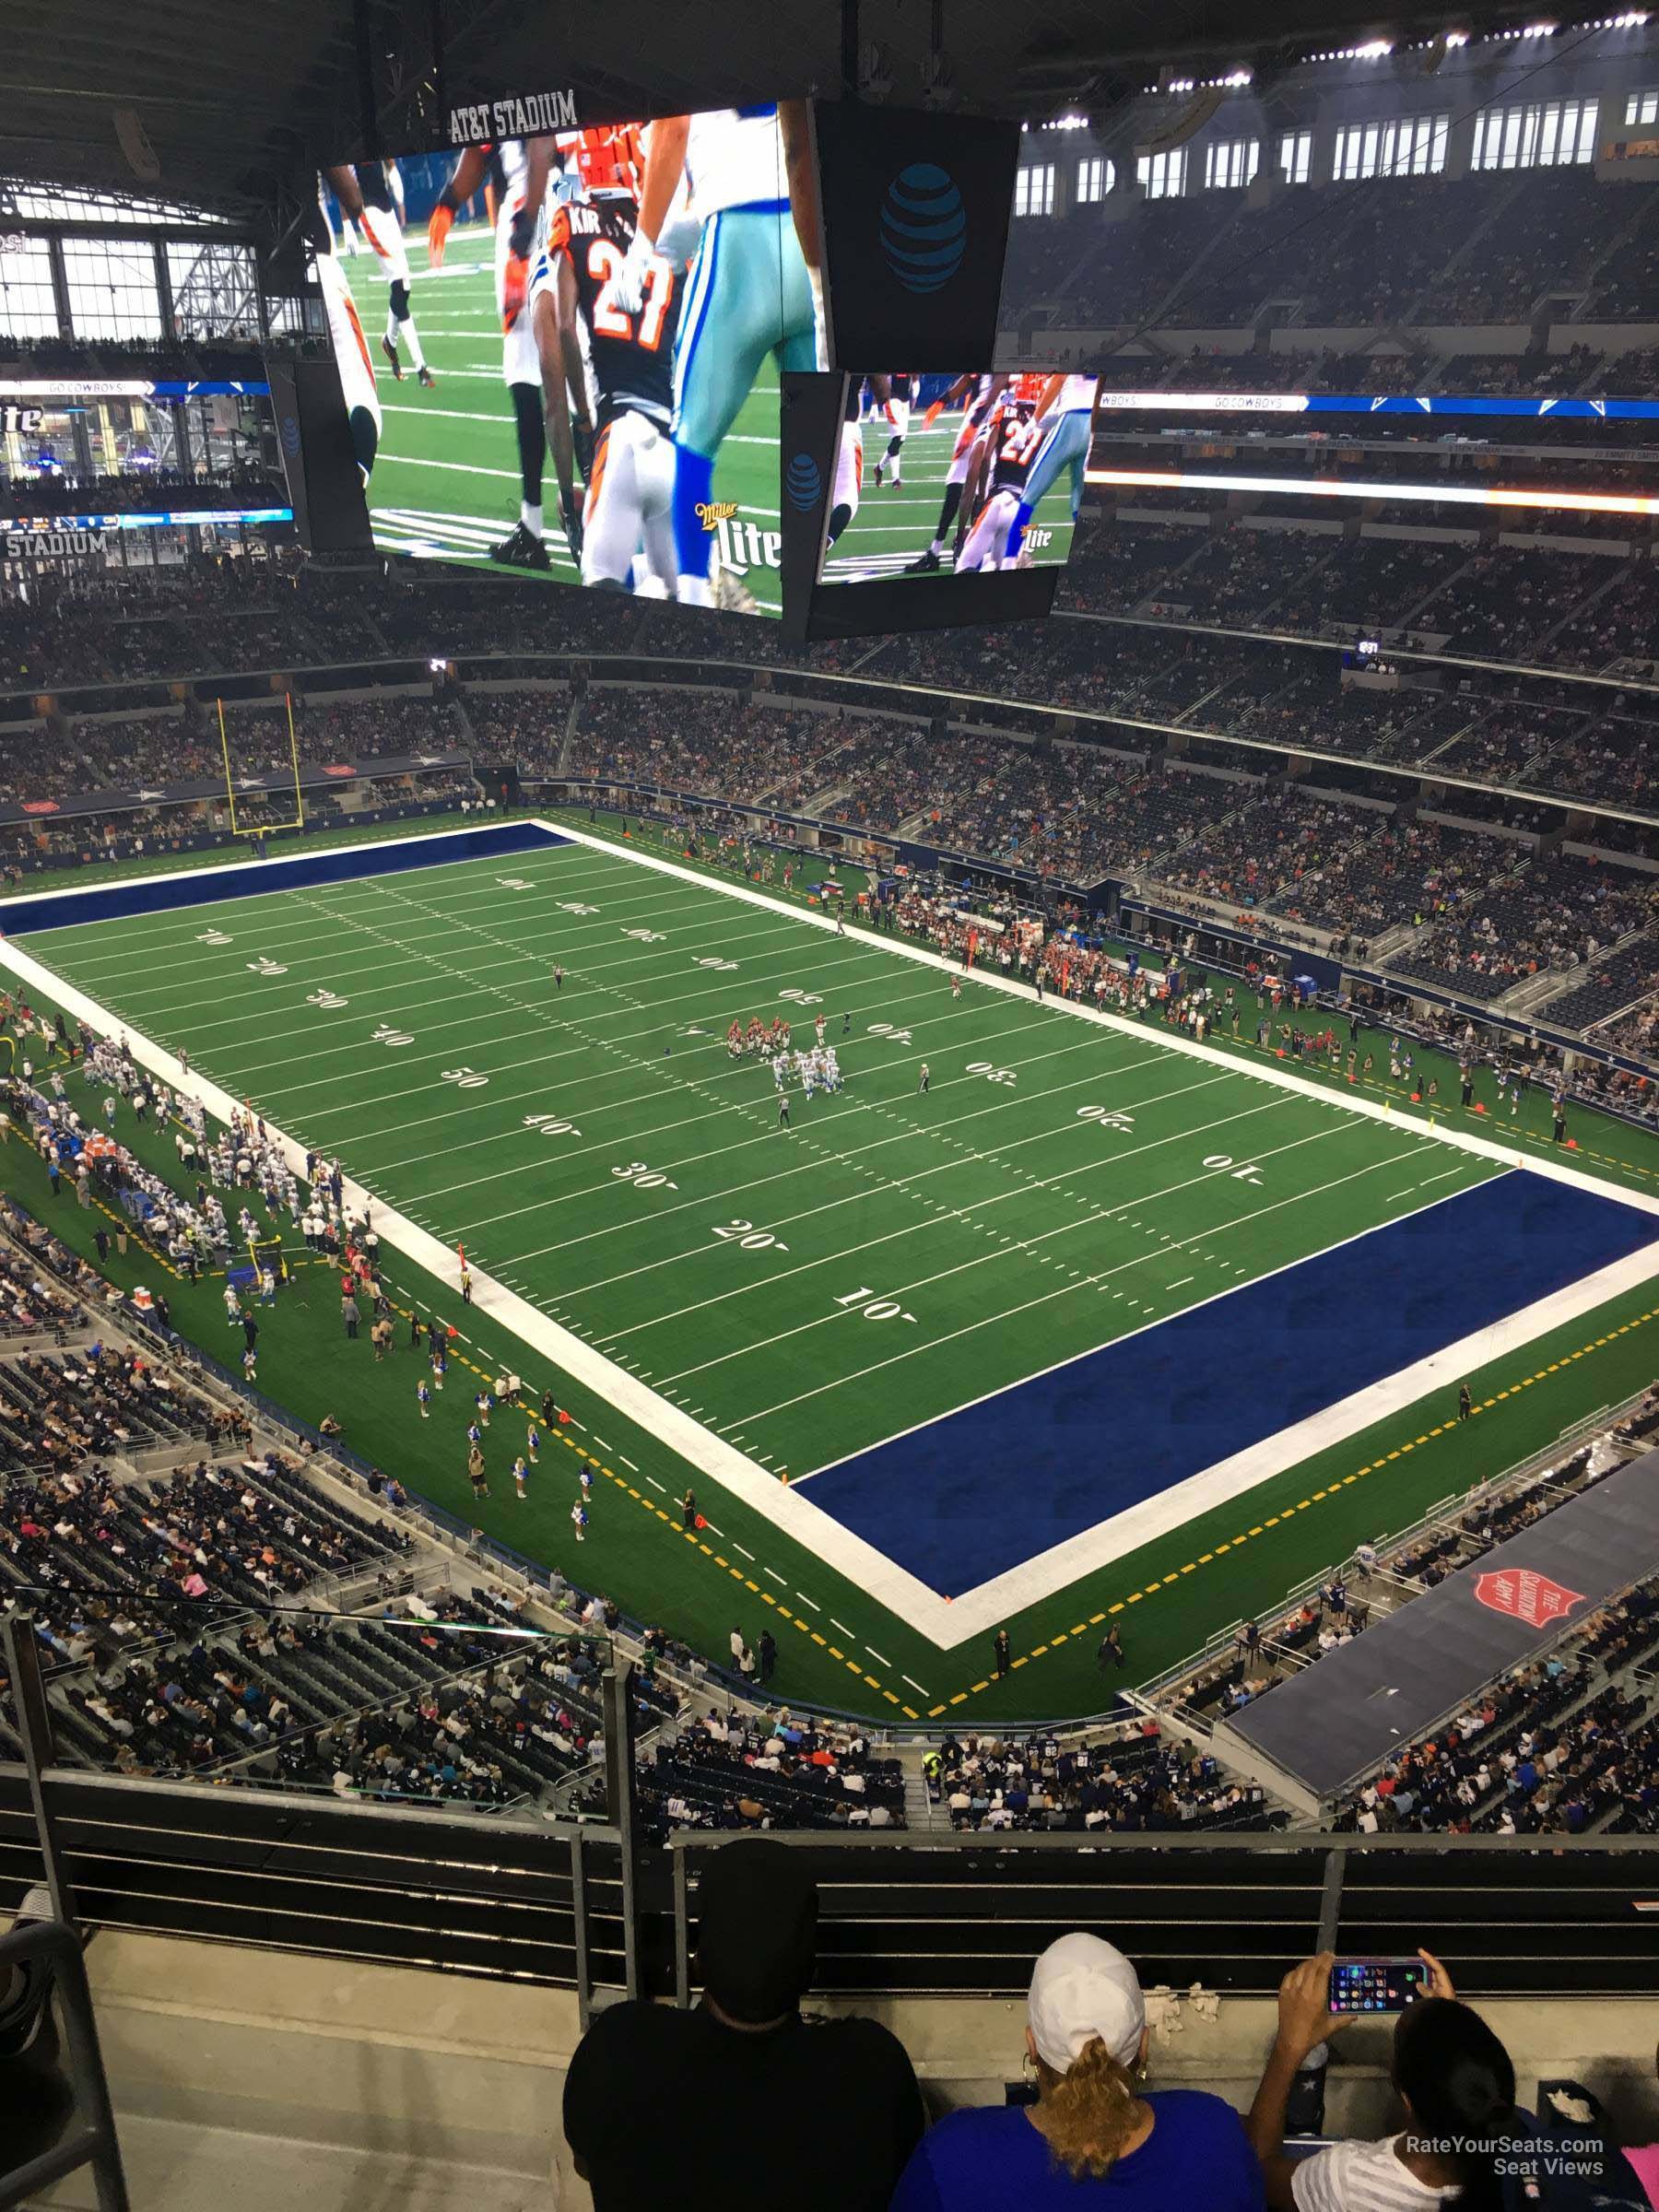 section 403, row 4 seat view  for football - at&t stadium (cowboys stadium)